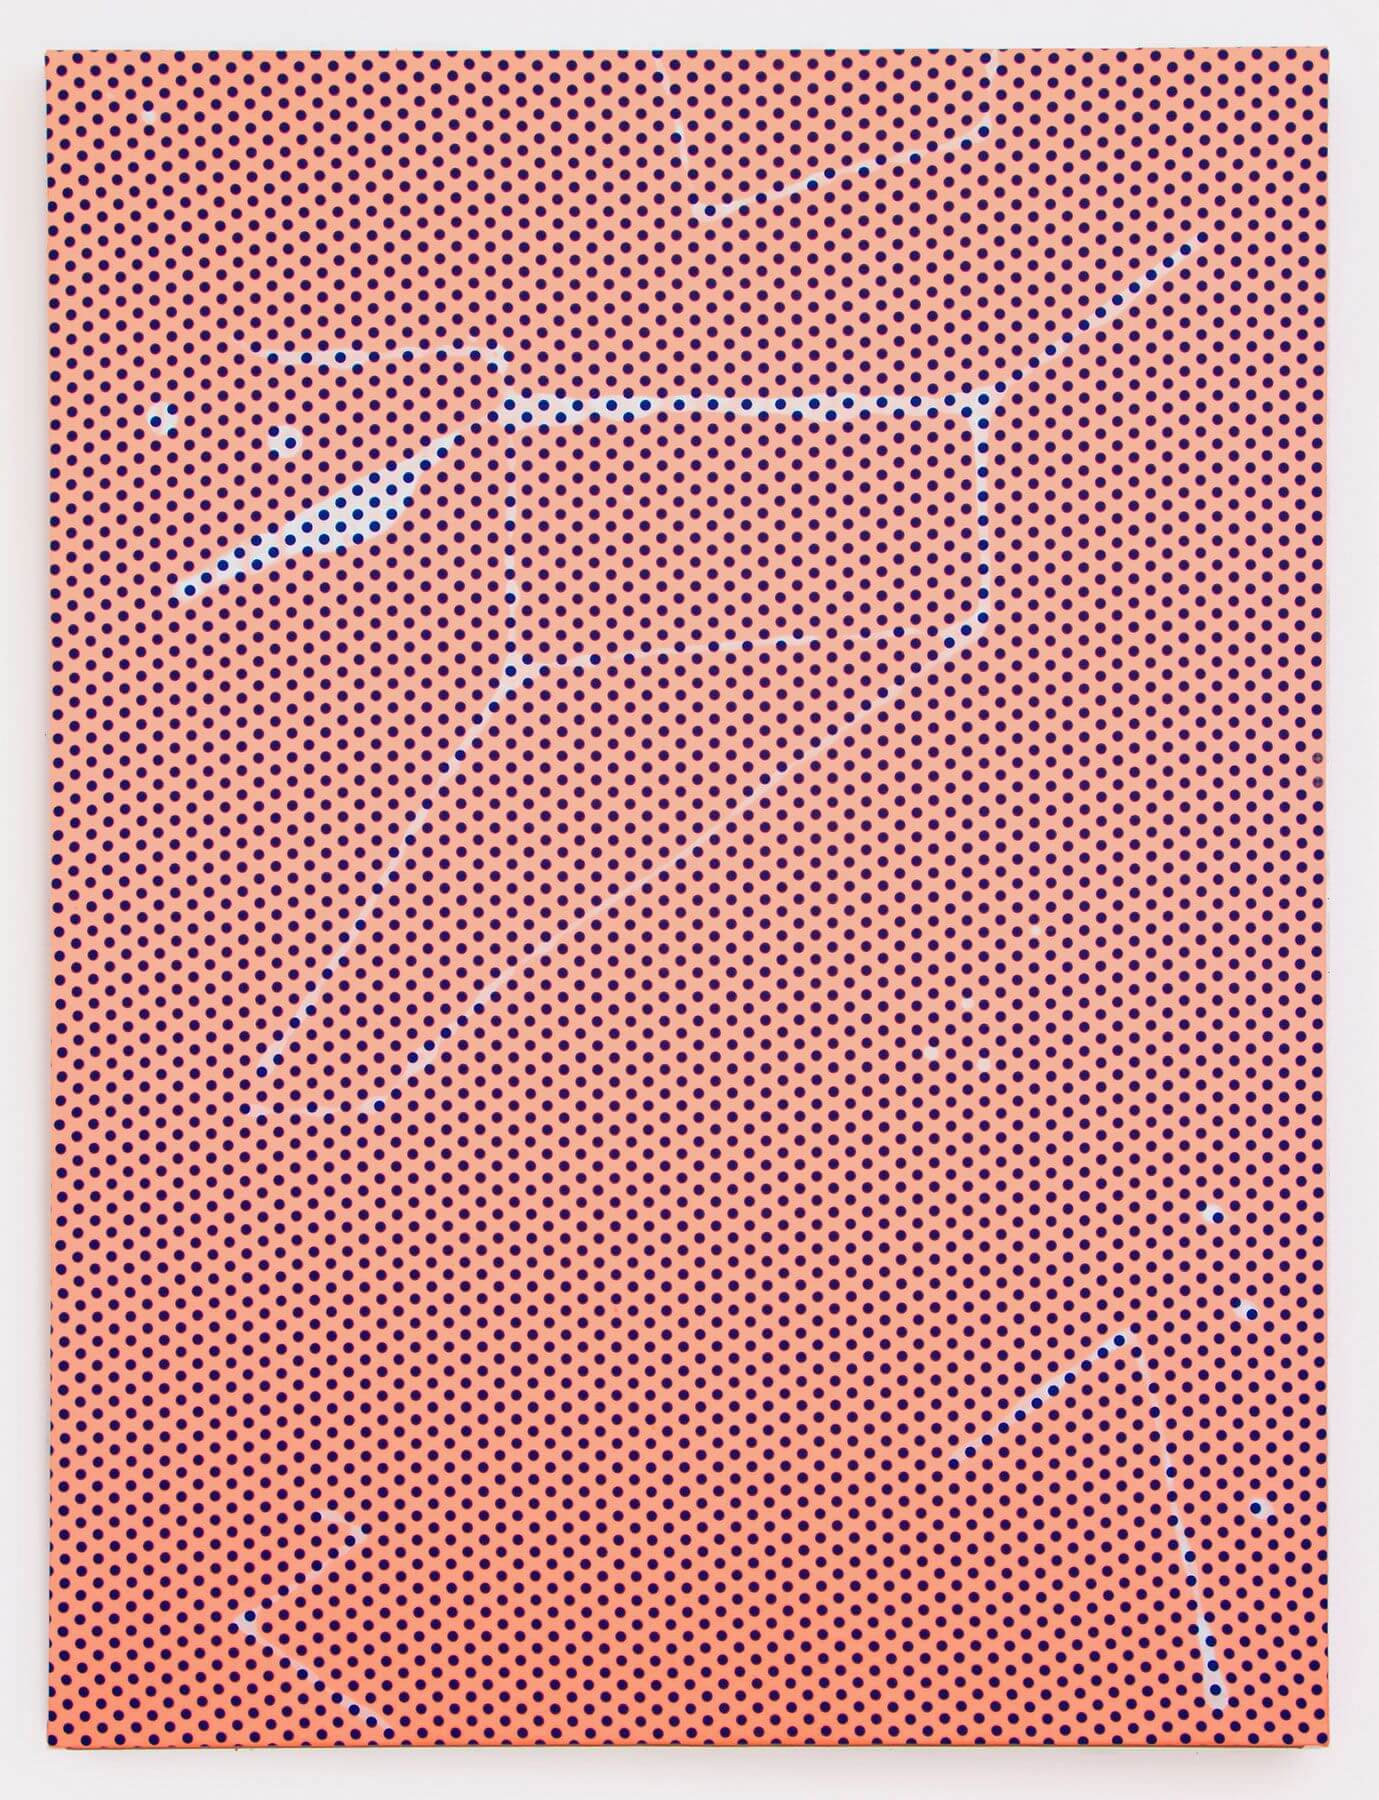 Cheryl Donegan
                                        'Untitled (peach dots)', 2014
                                        48 x 36 Inches
                                        dyed cotton
                                        